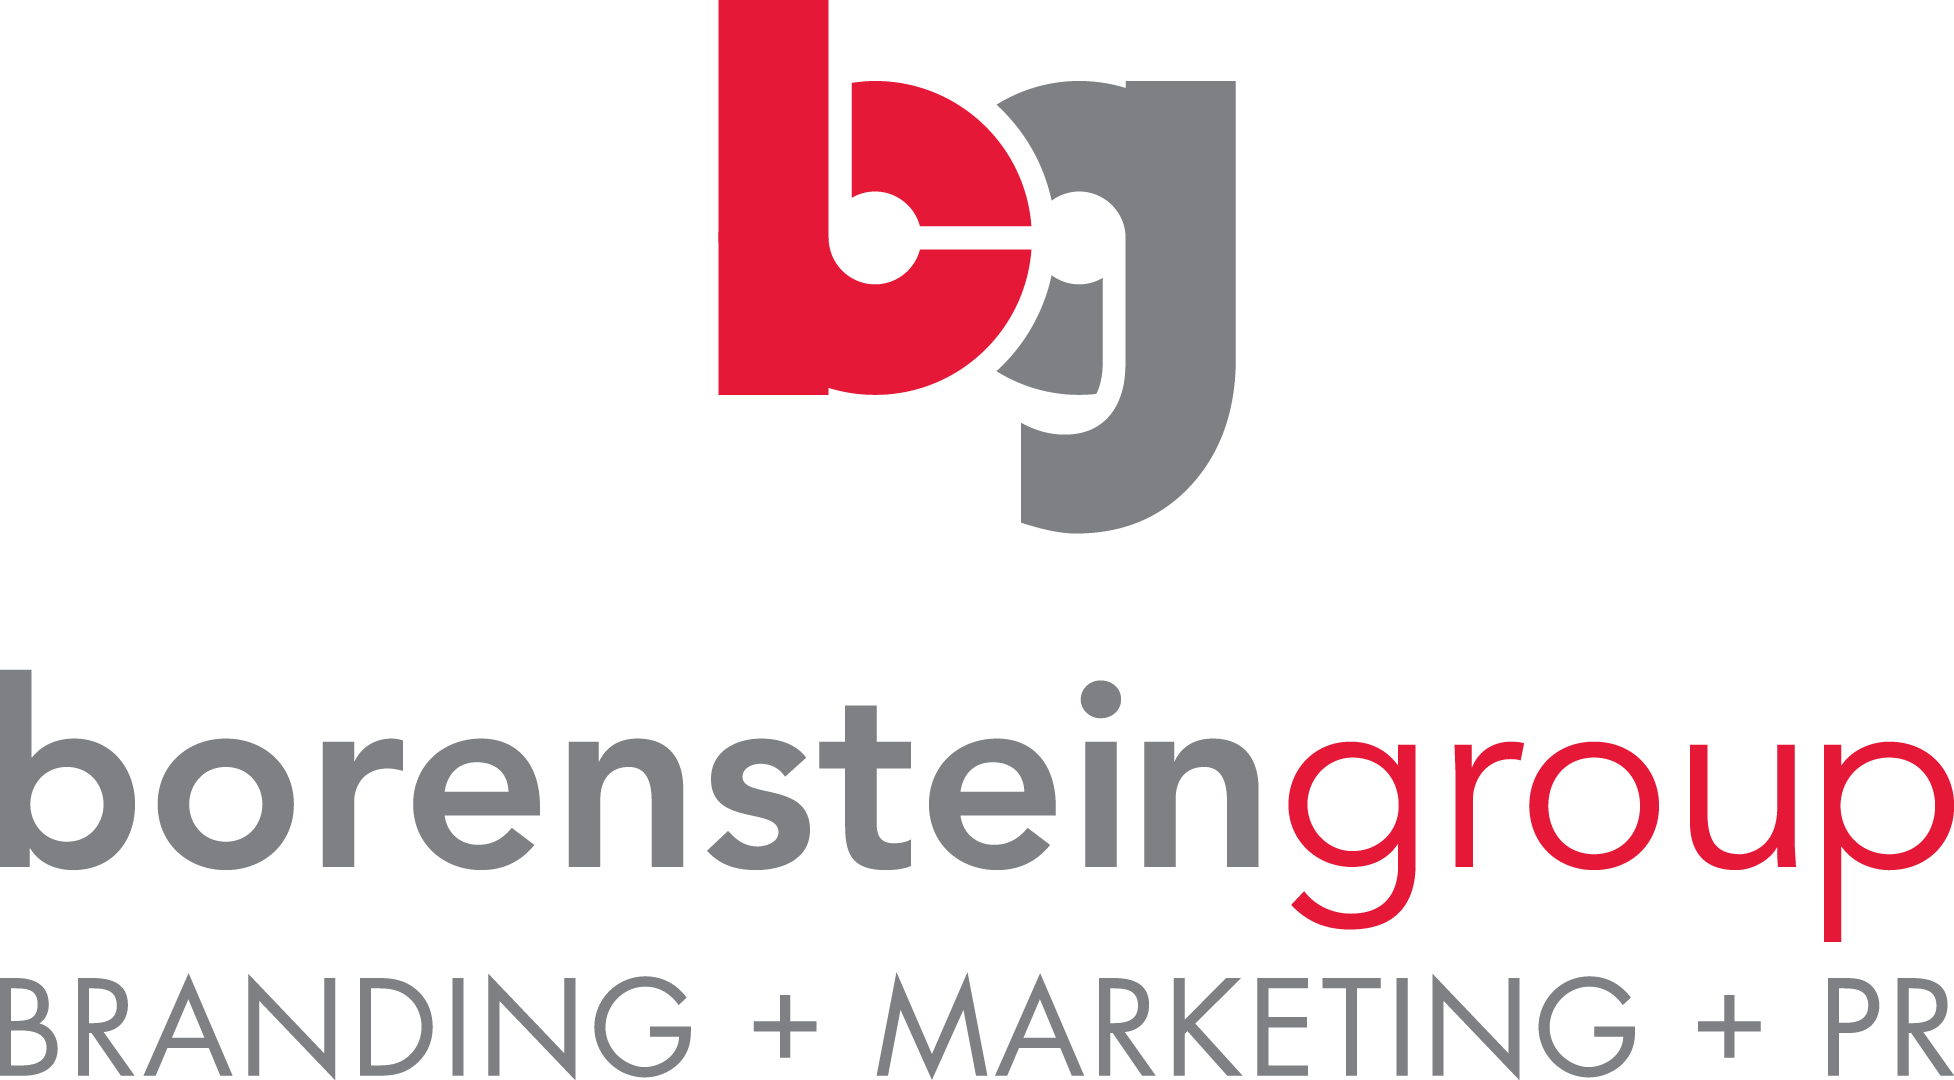 Borenstein Group, Inc. profile on Qualified.One